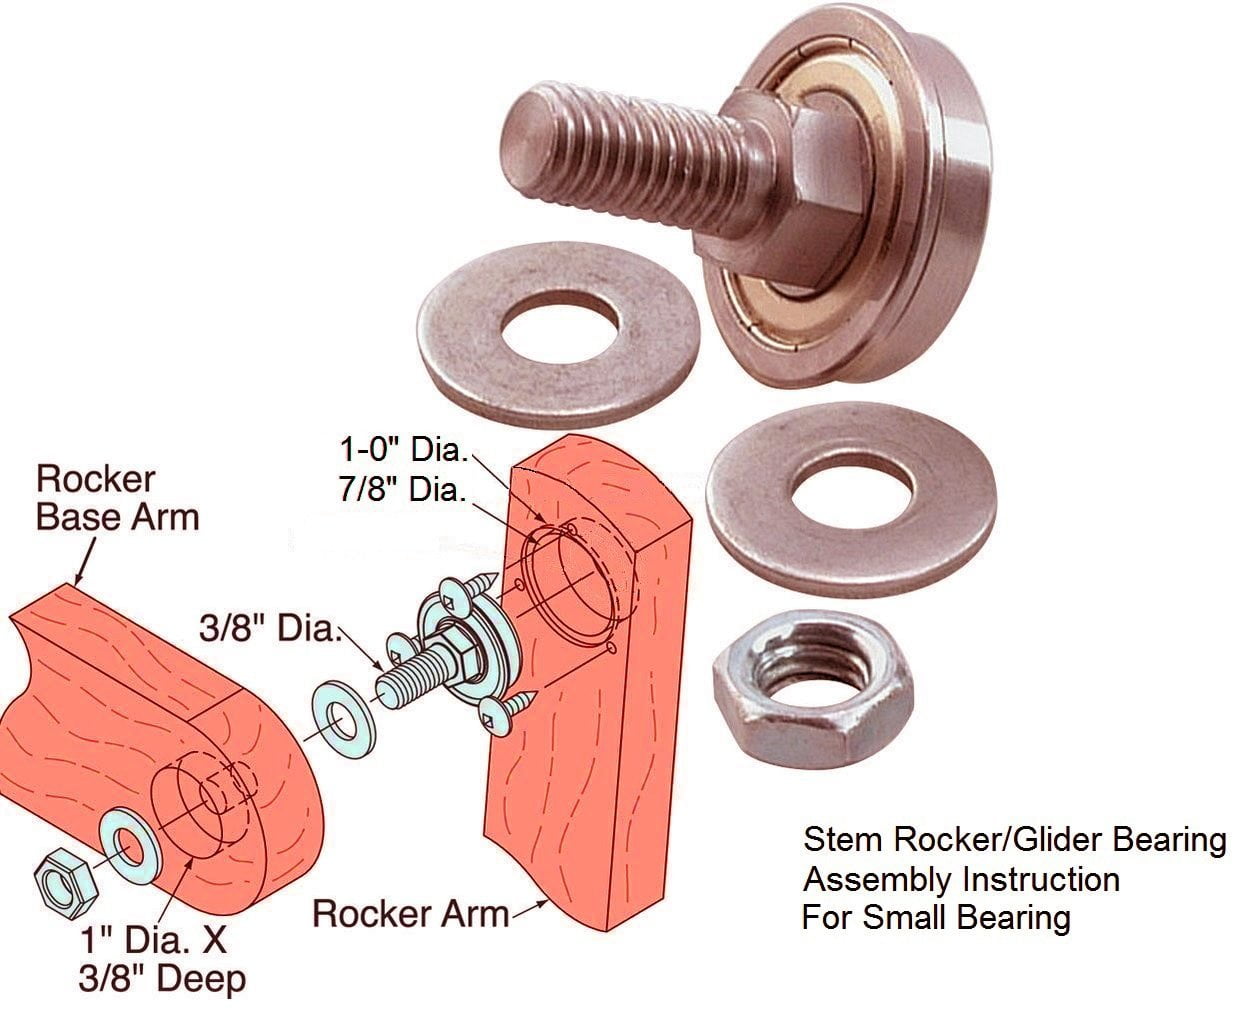 Glider and Rocker Hardware with Mounting Hardware Bearing Replace 124094. Furniture and Miscellaneous 8 XiKe Stem Rocker Assembly Bearing 1-1/8 OD